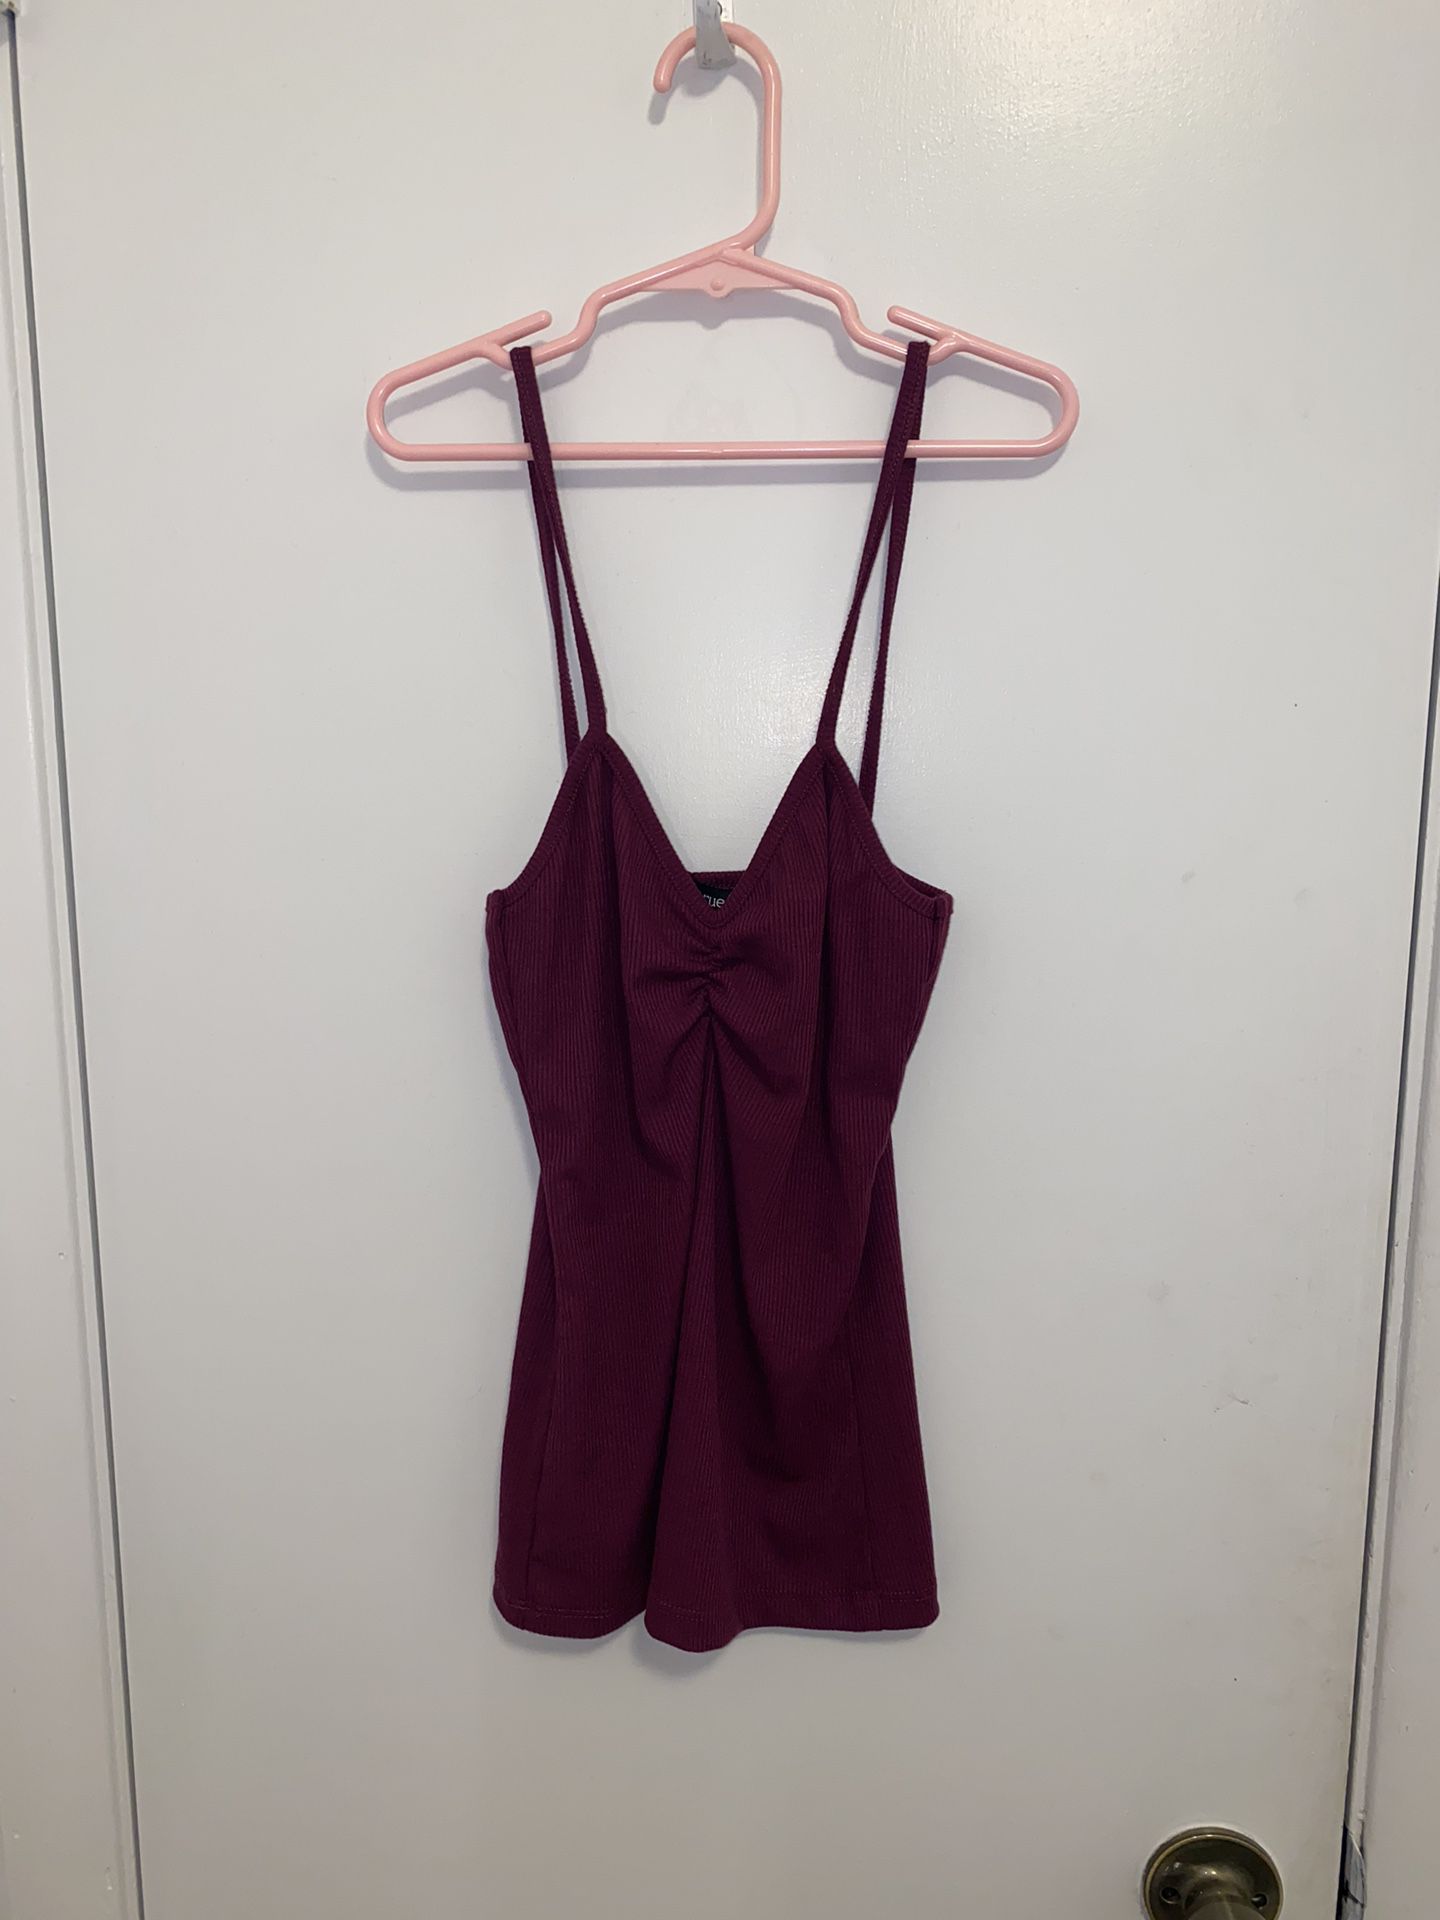 Burgundy Cami Top From Rue21 